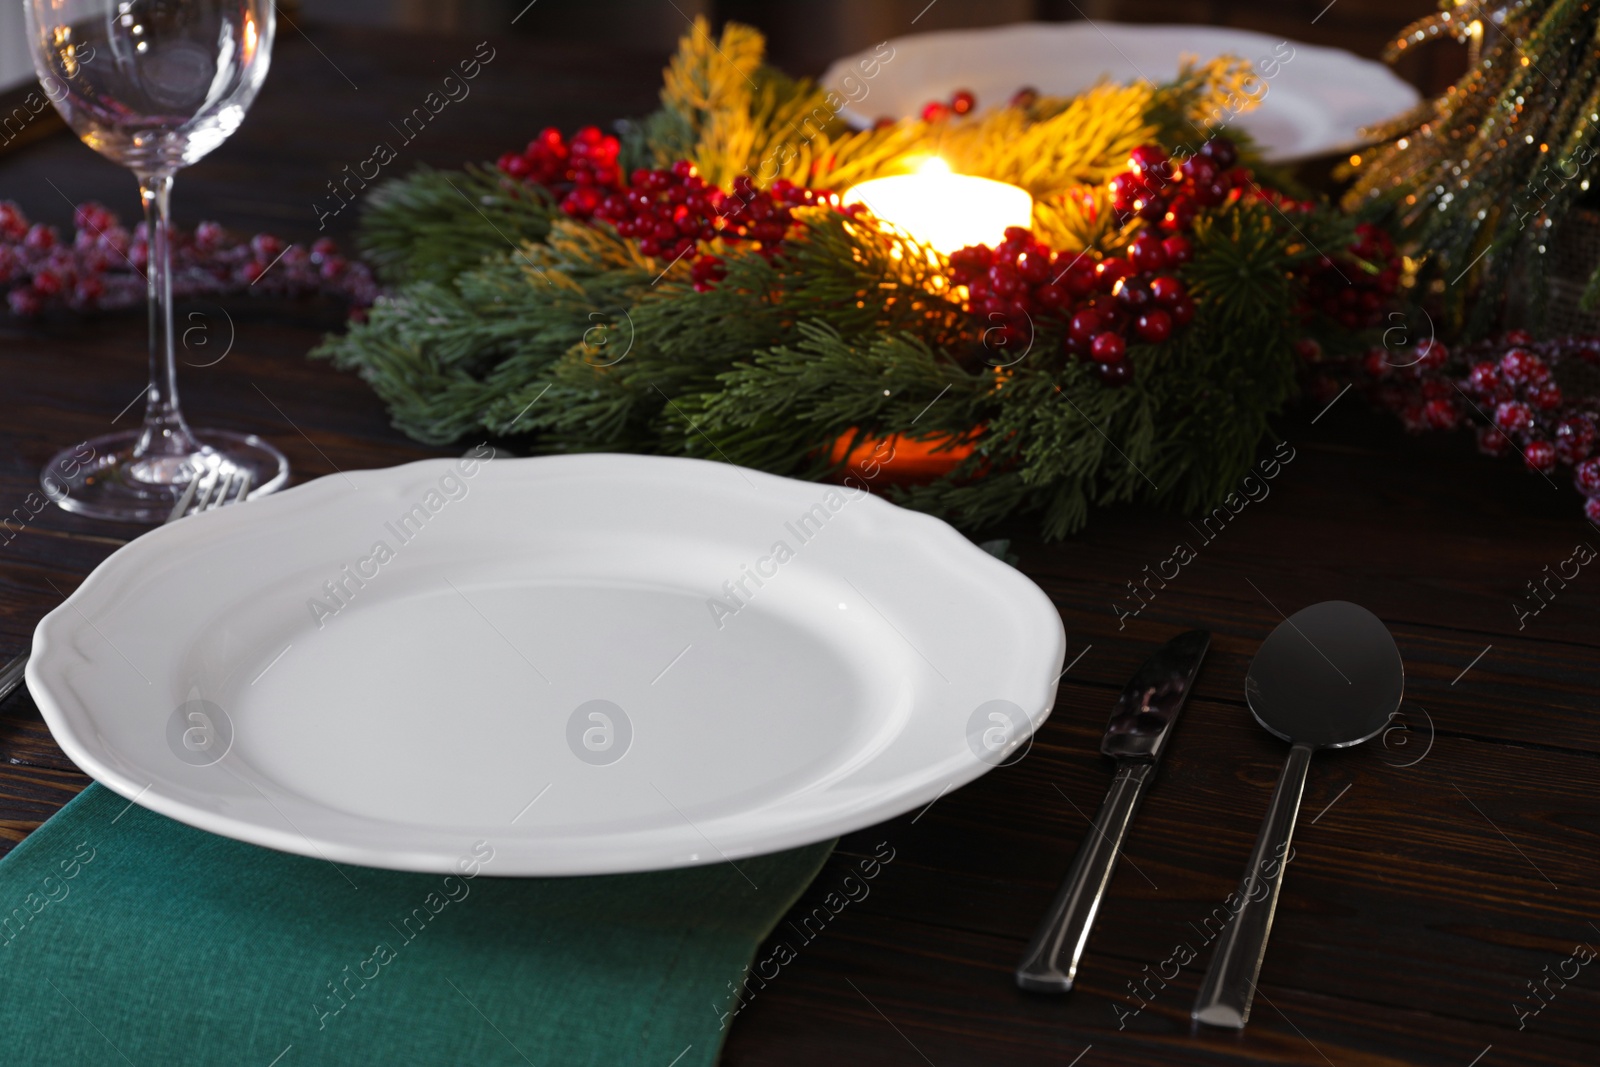 Photo of Plate, cutlery, glass and festive decor on wooden table